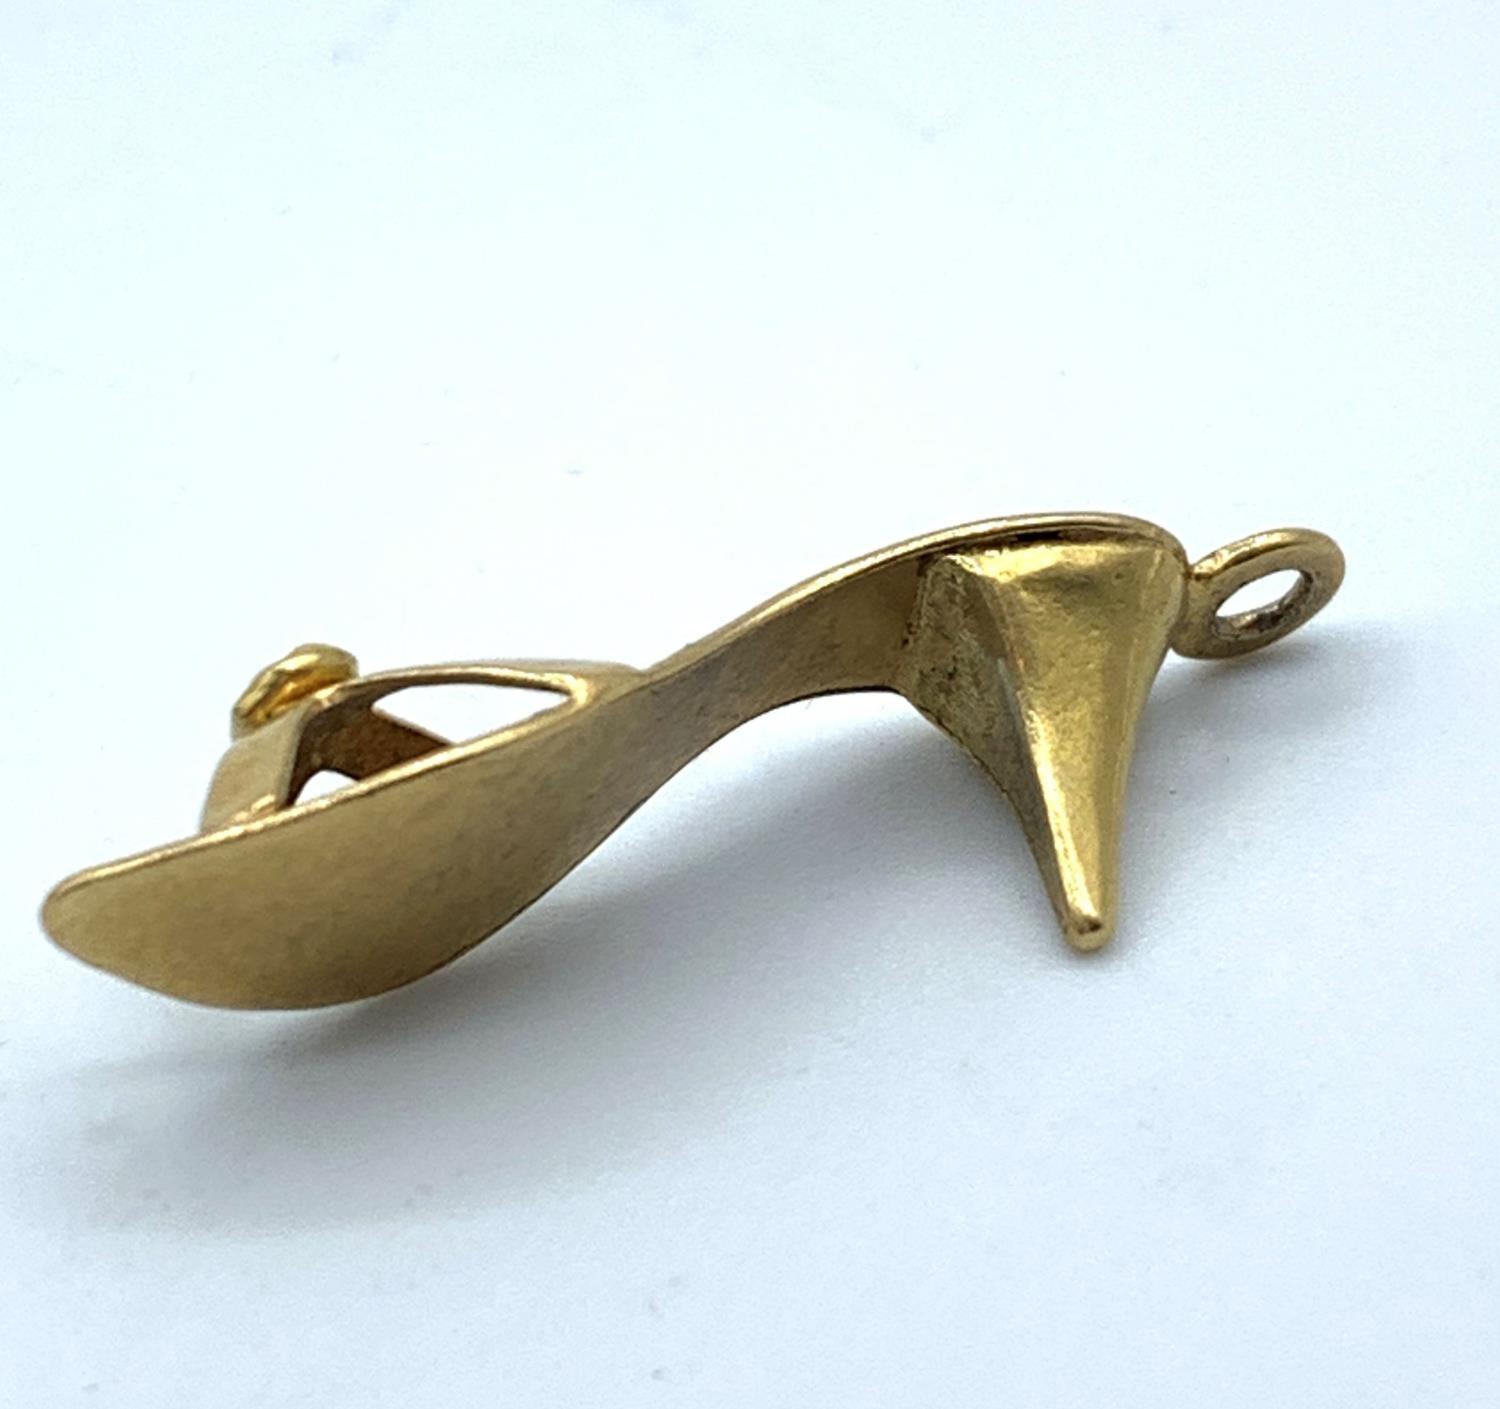 9ct Gold Shoe Charm/Pendant, weight 2.7g and 3cm long - Image 6 of 6